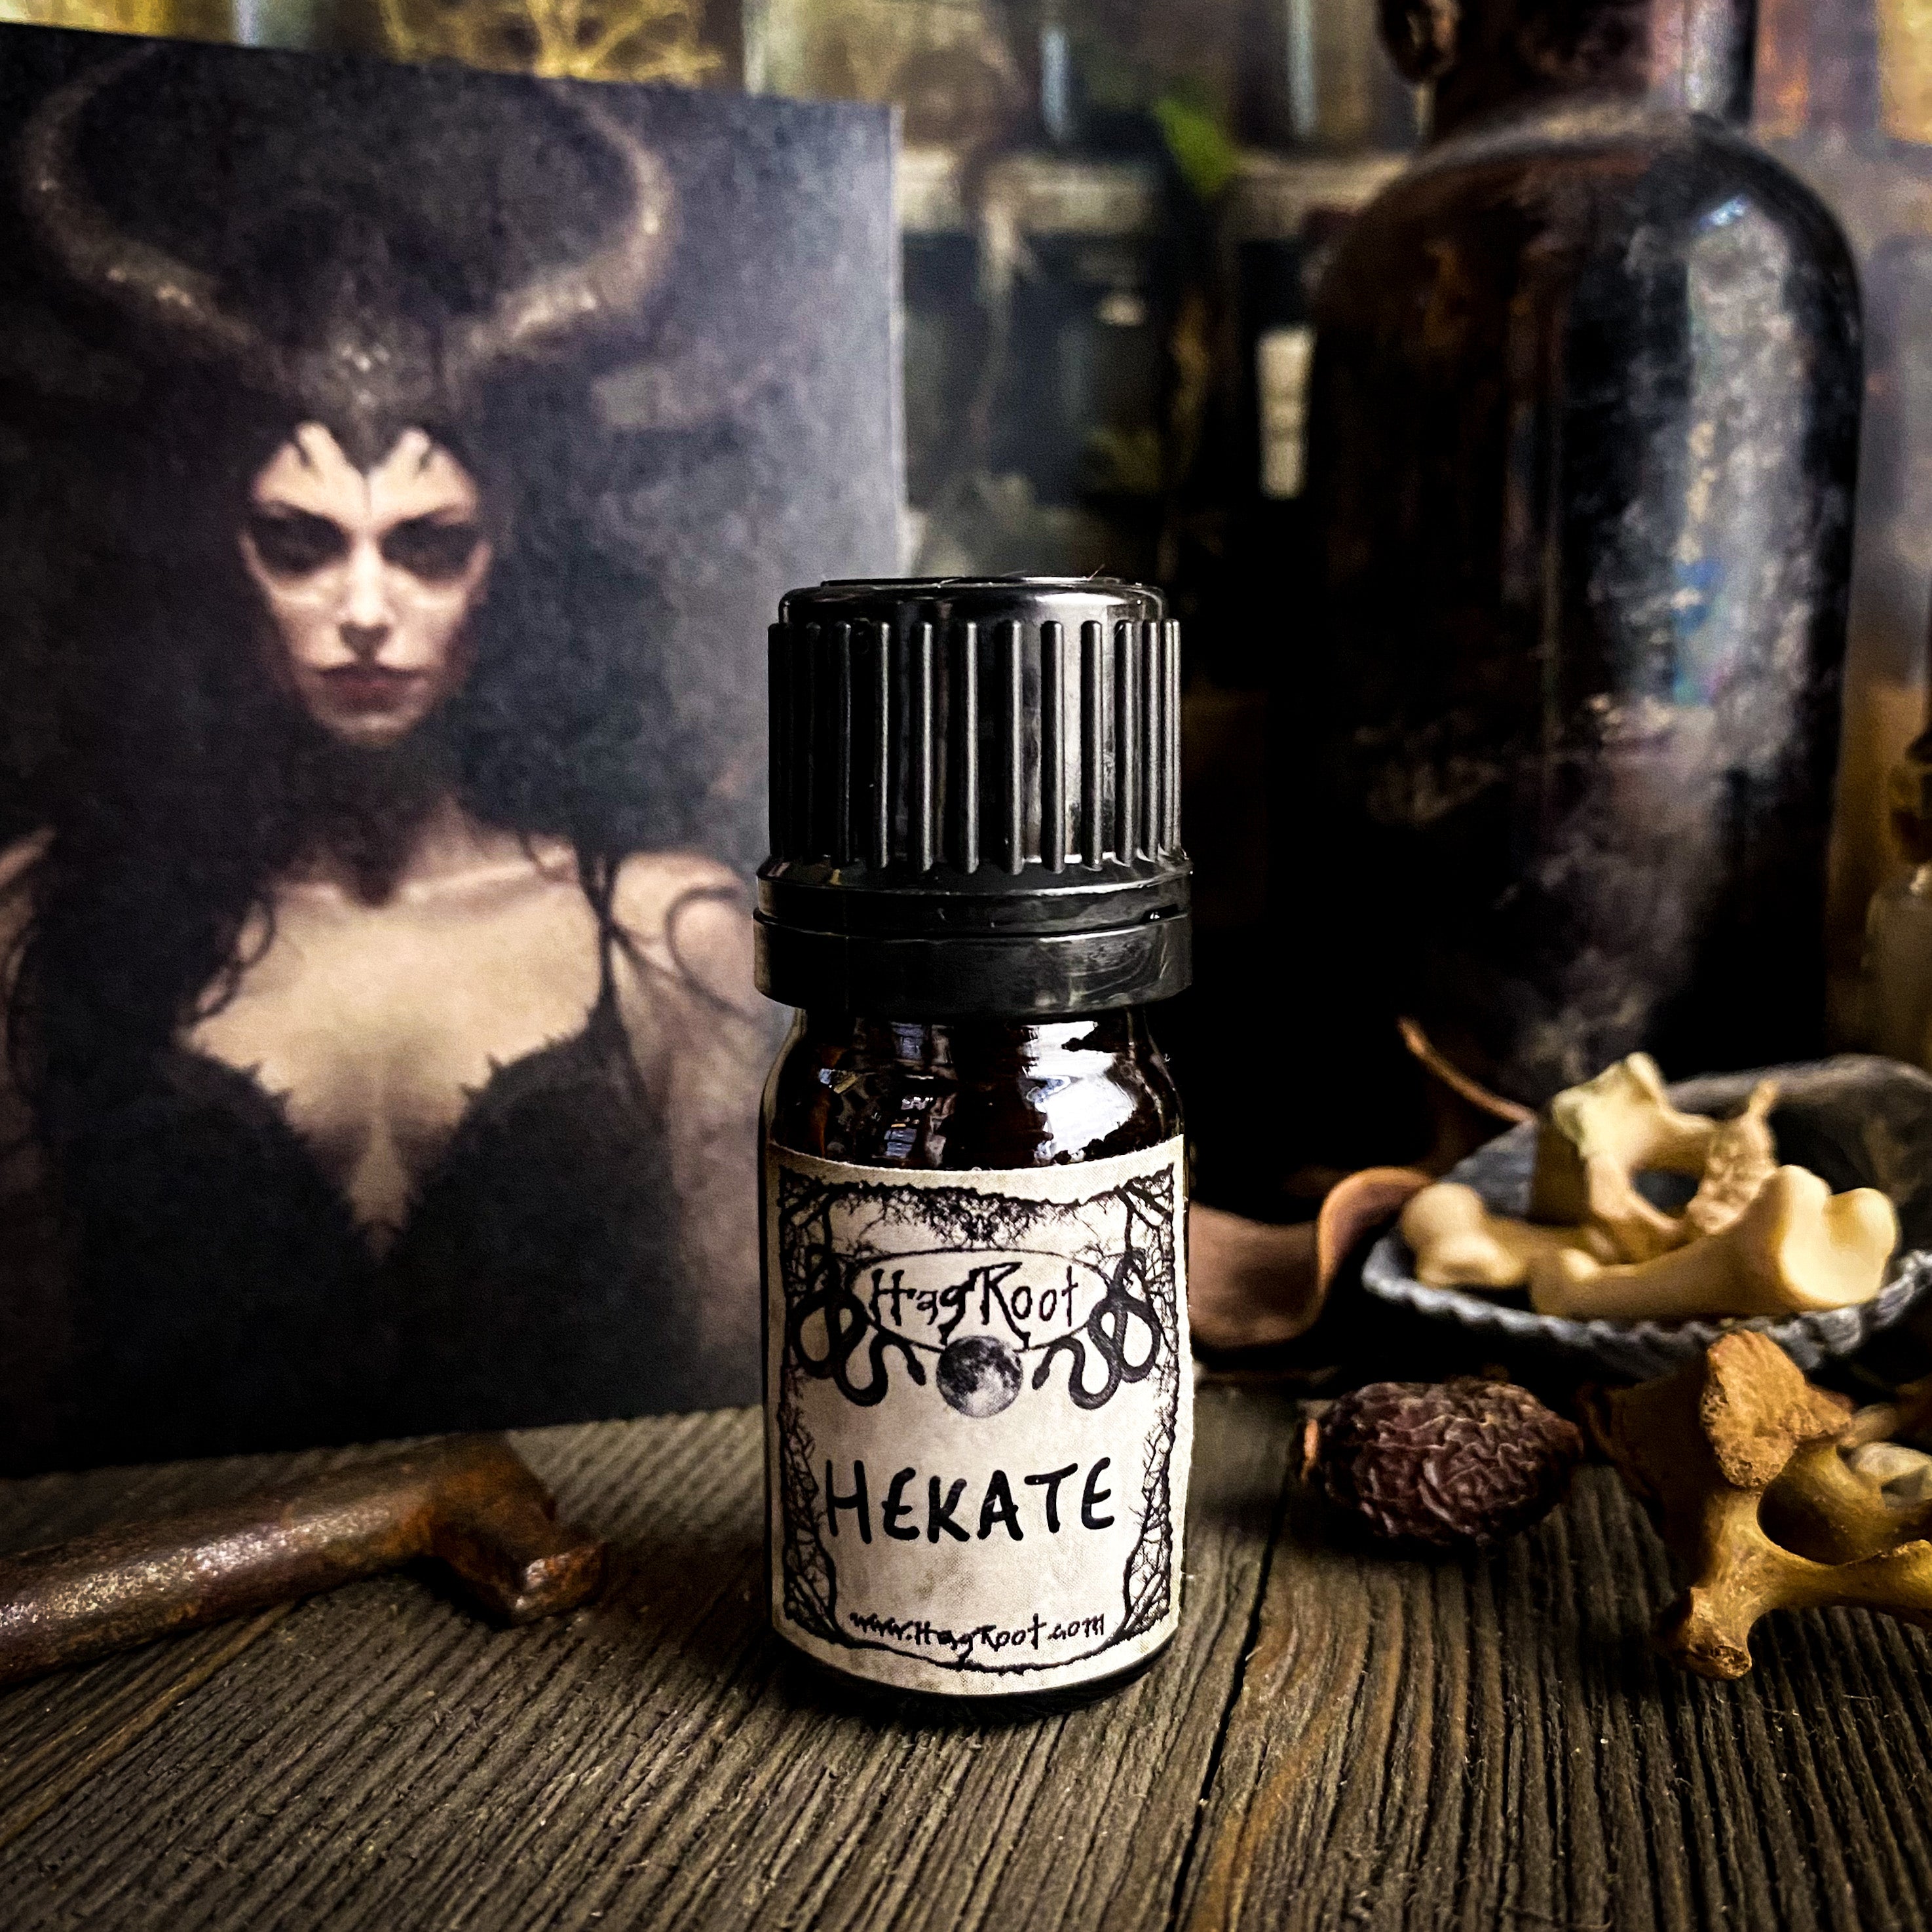 HEKATE-(Rose, Vanilla, Amber, Cinnamon, Frankincense)-2021 Edition-Perfume, Cologne, Anointing, Ritual Oil